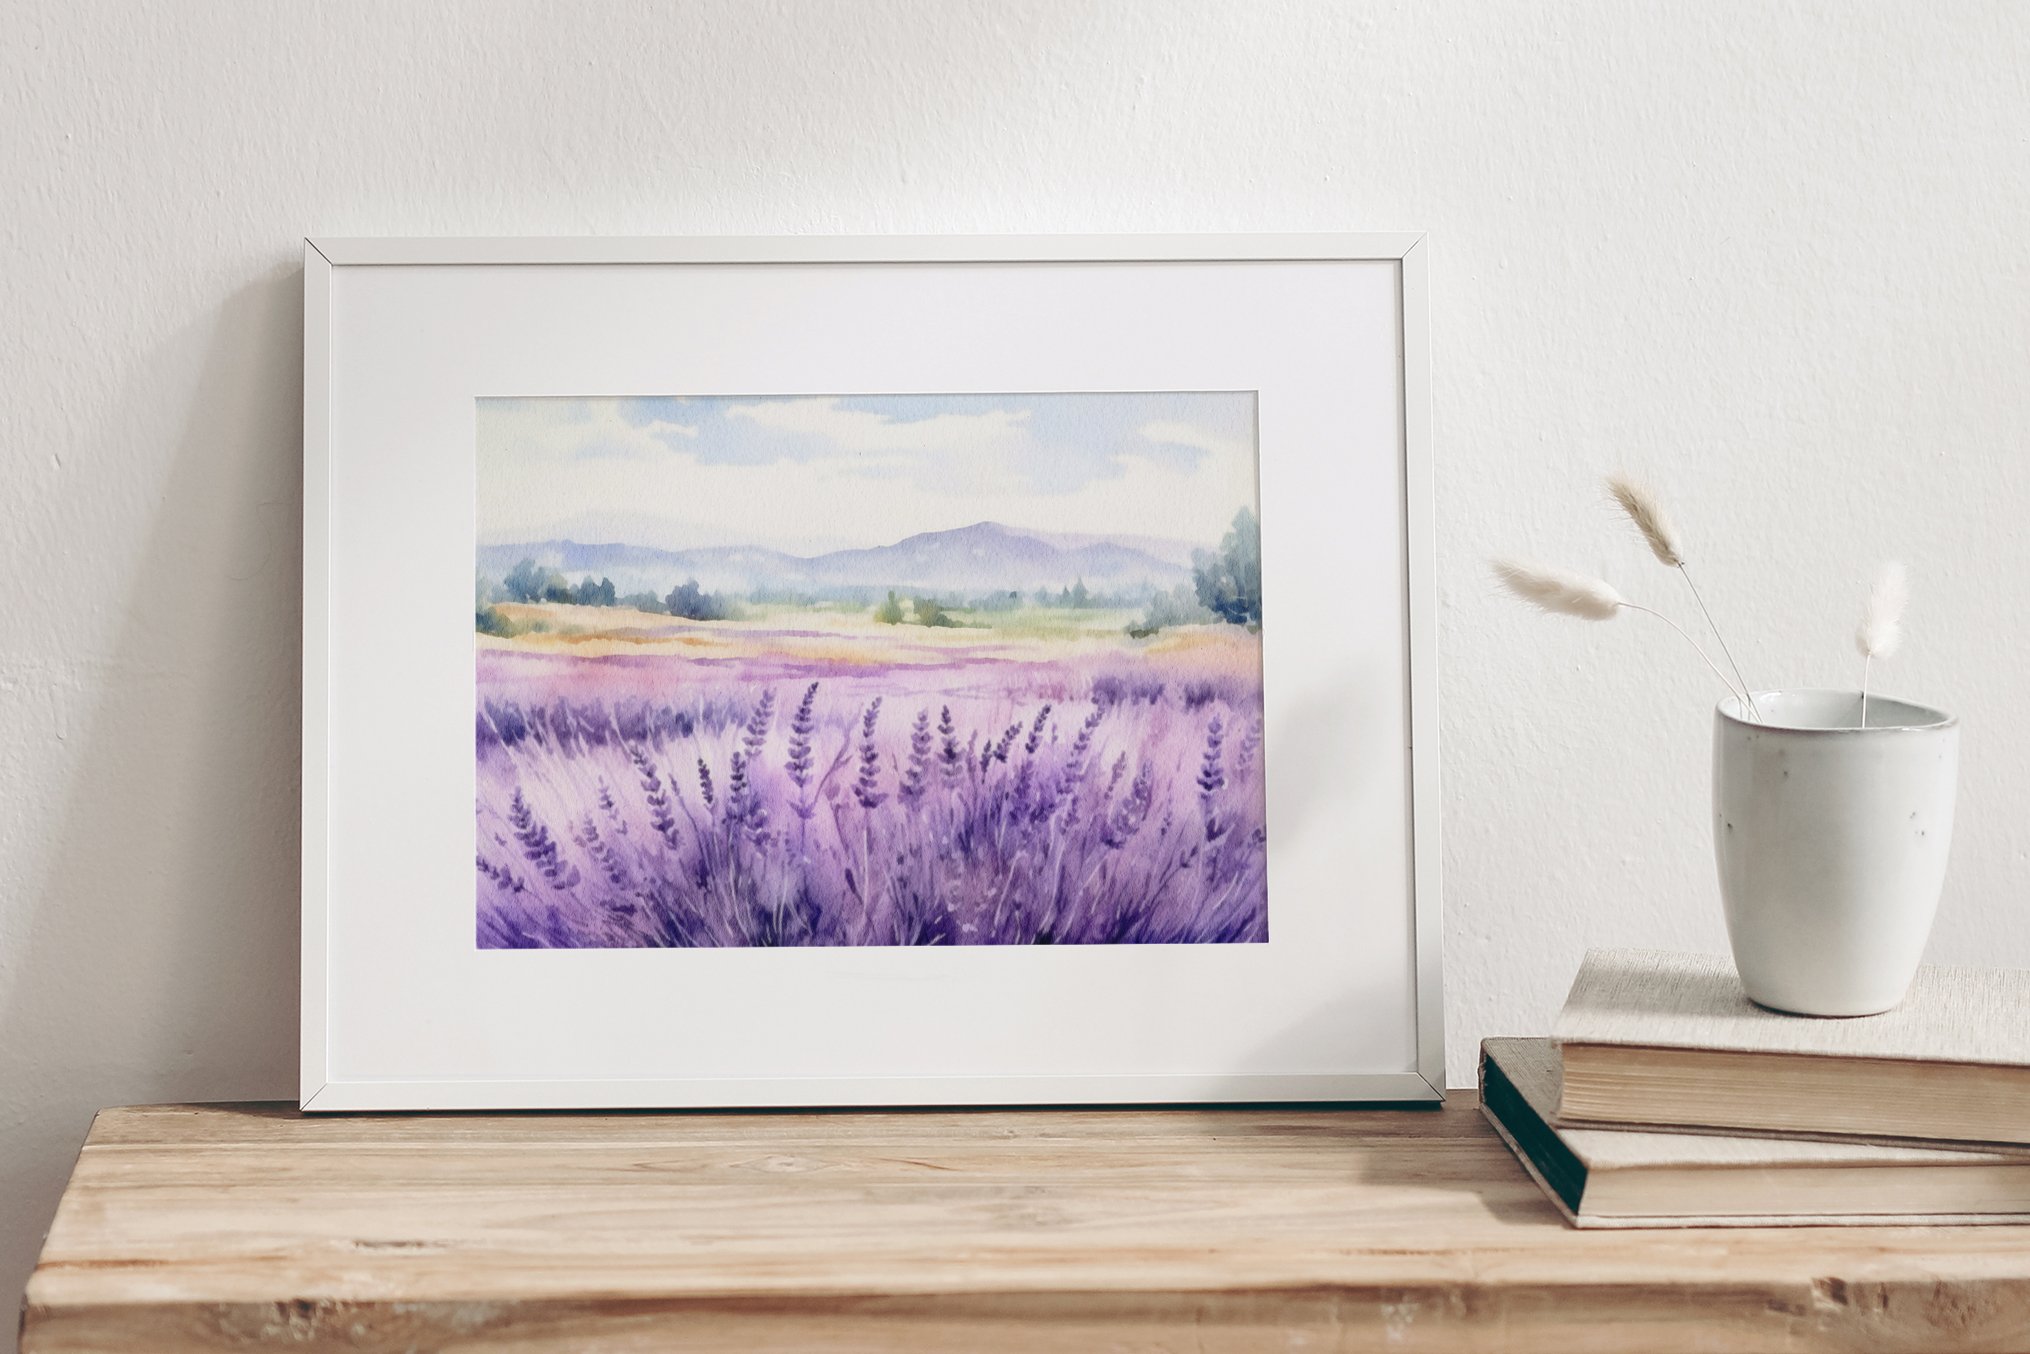 LAVENDER FIELDS Watercolour Abstract Backgrounds - Design Cuts